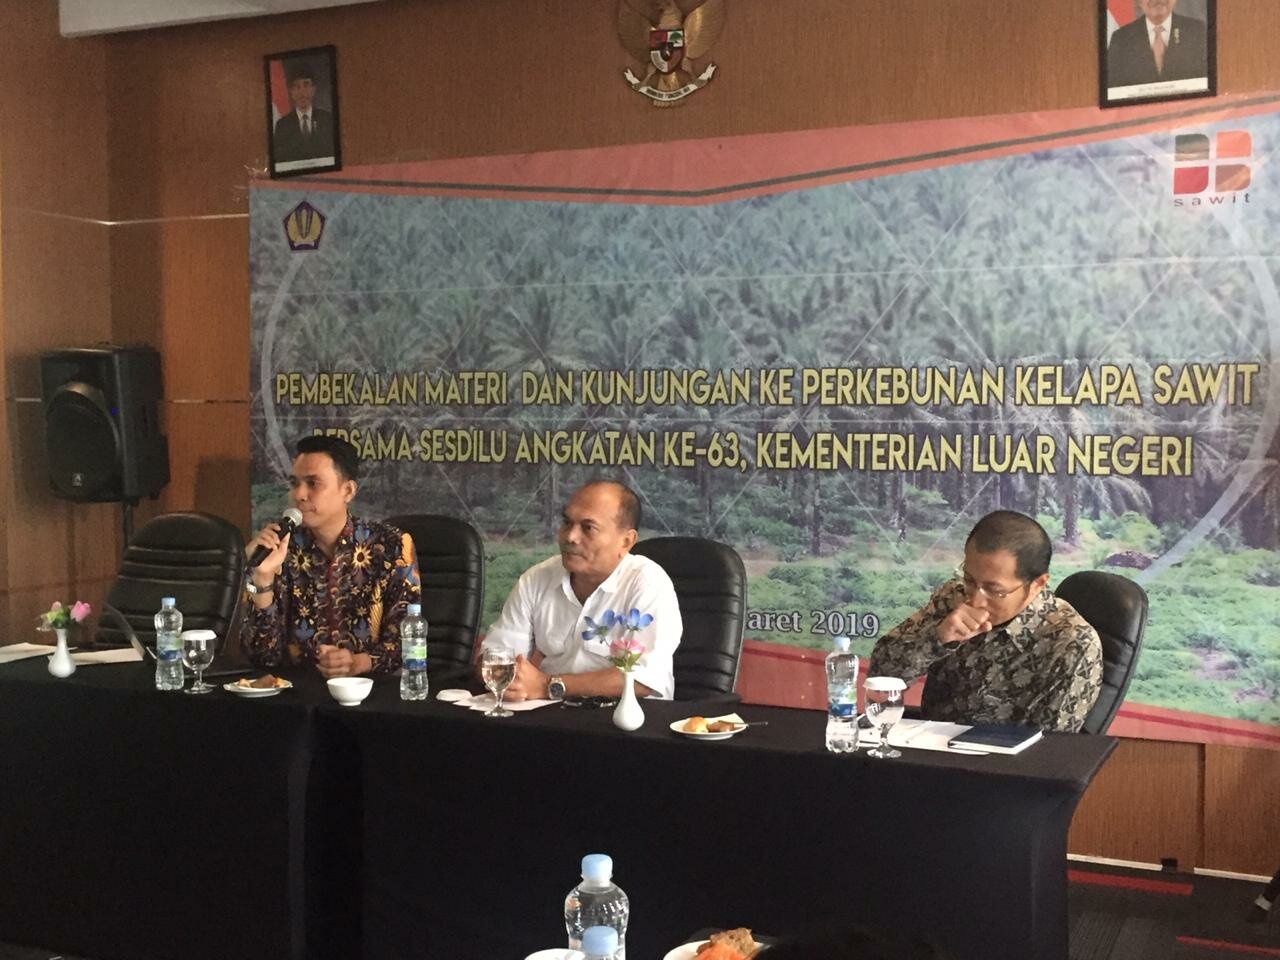 Indonesian Diplomats Visit Belitung Island to Improve Knowledge of Sustainable Palm Oil